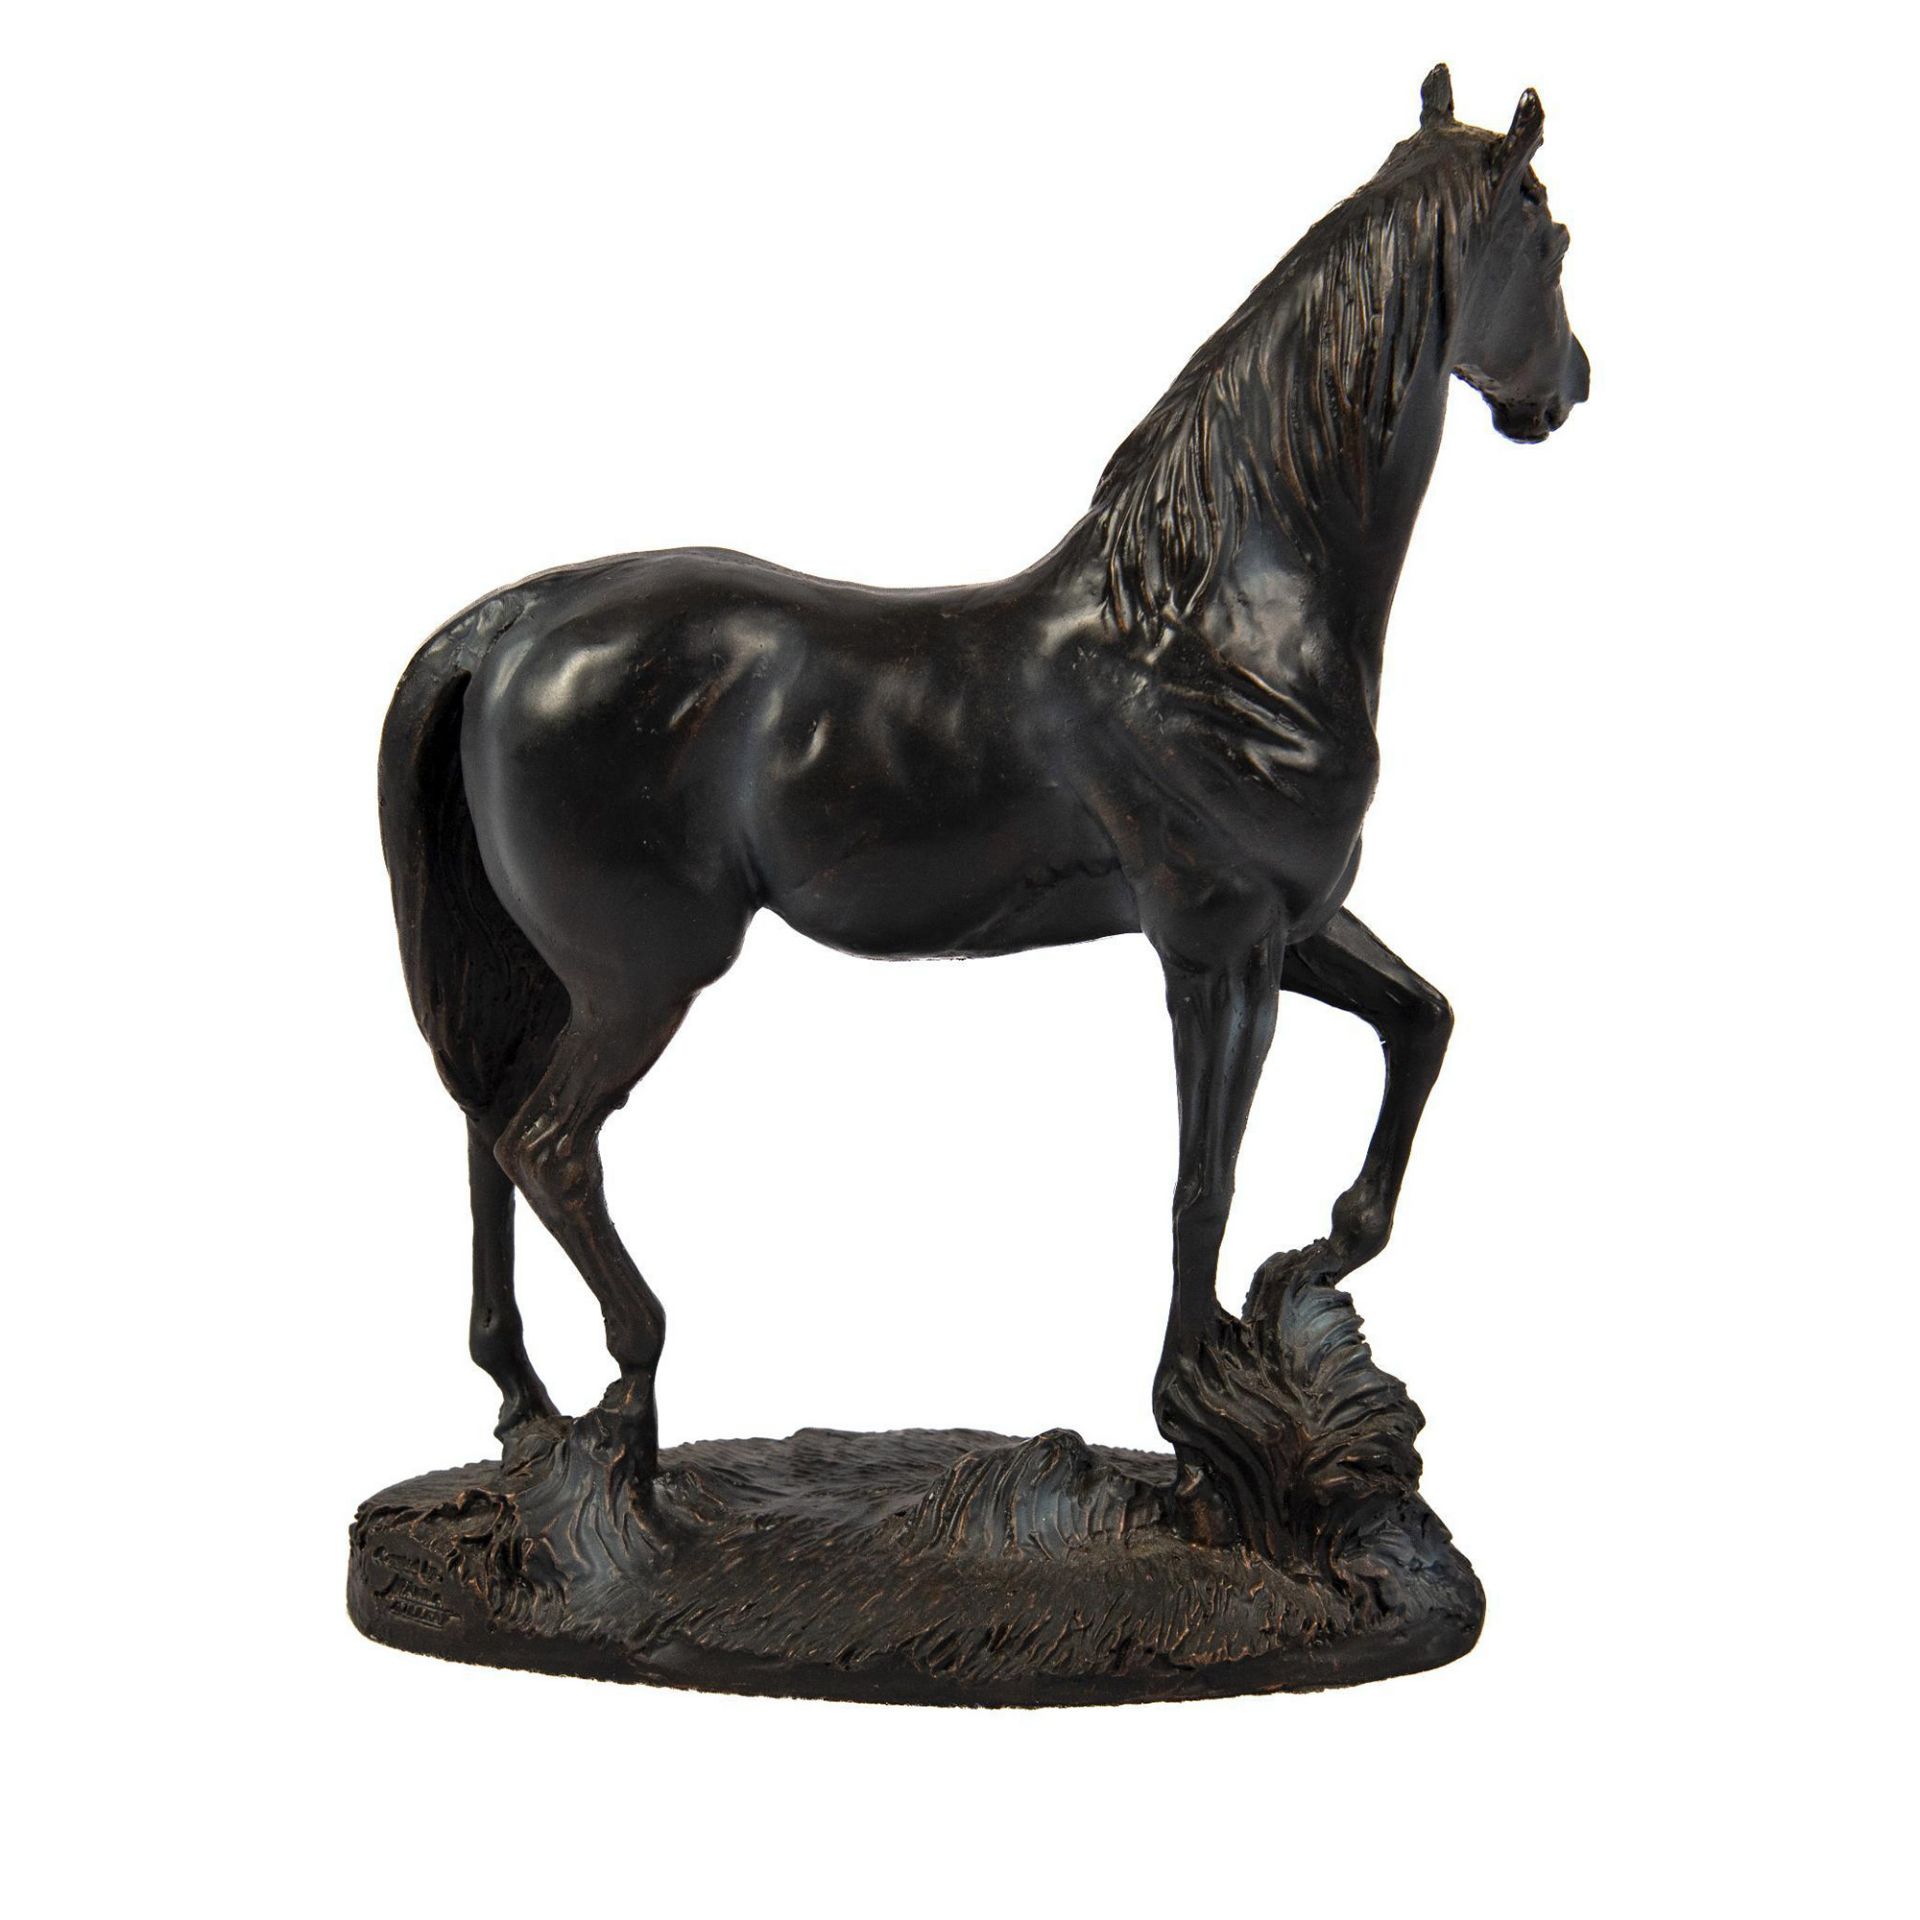 Small Marka Gallery Horse Sculpture - Image 3 of 4